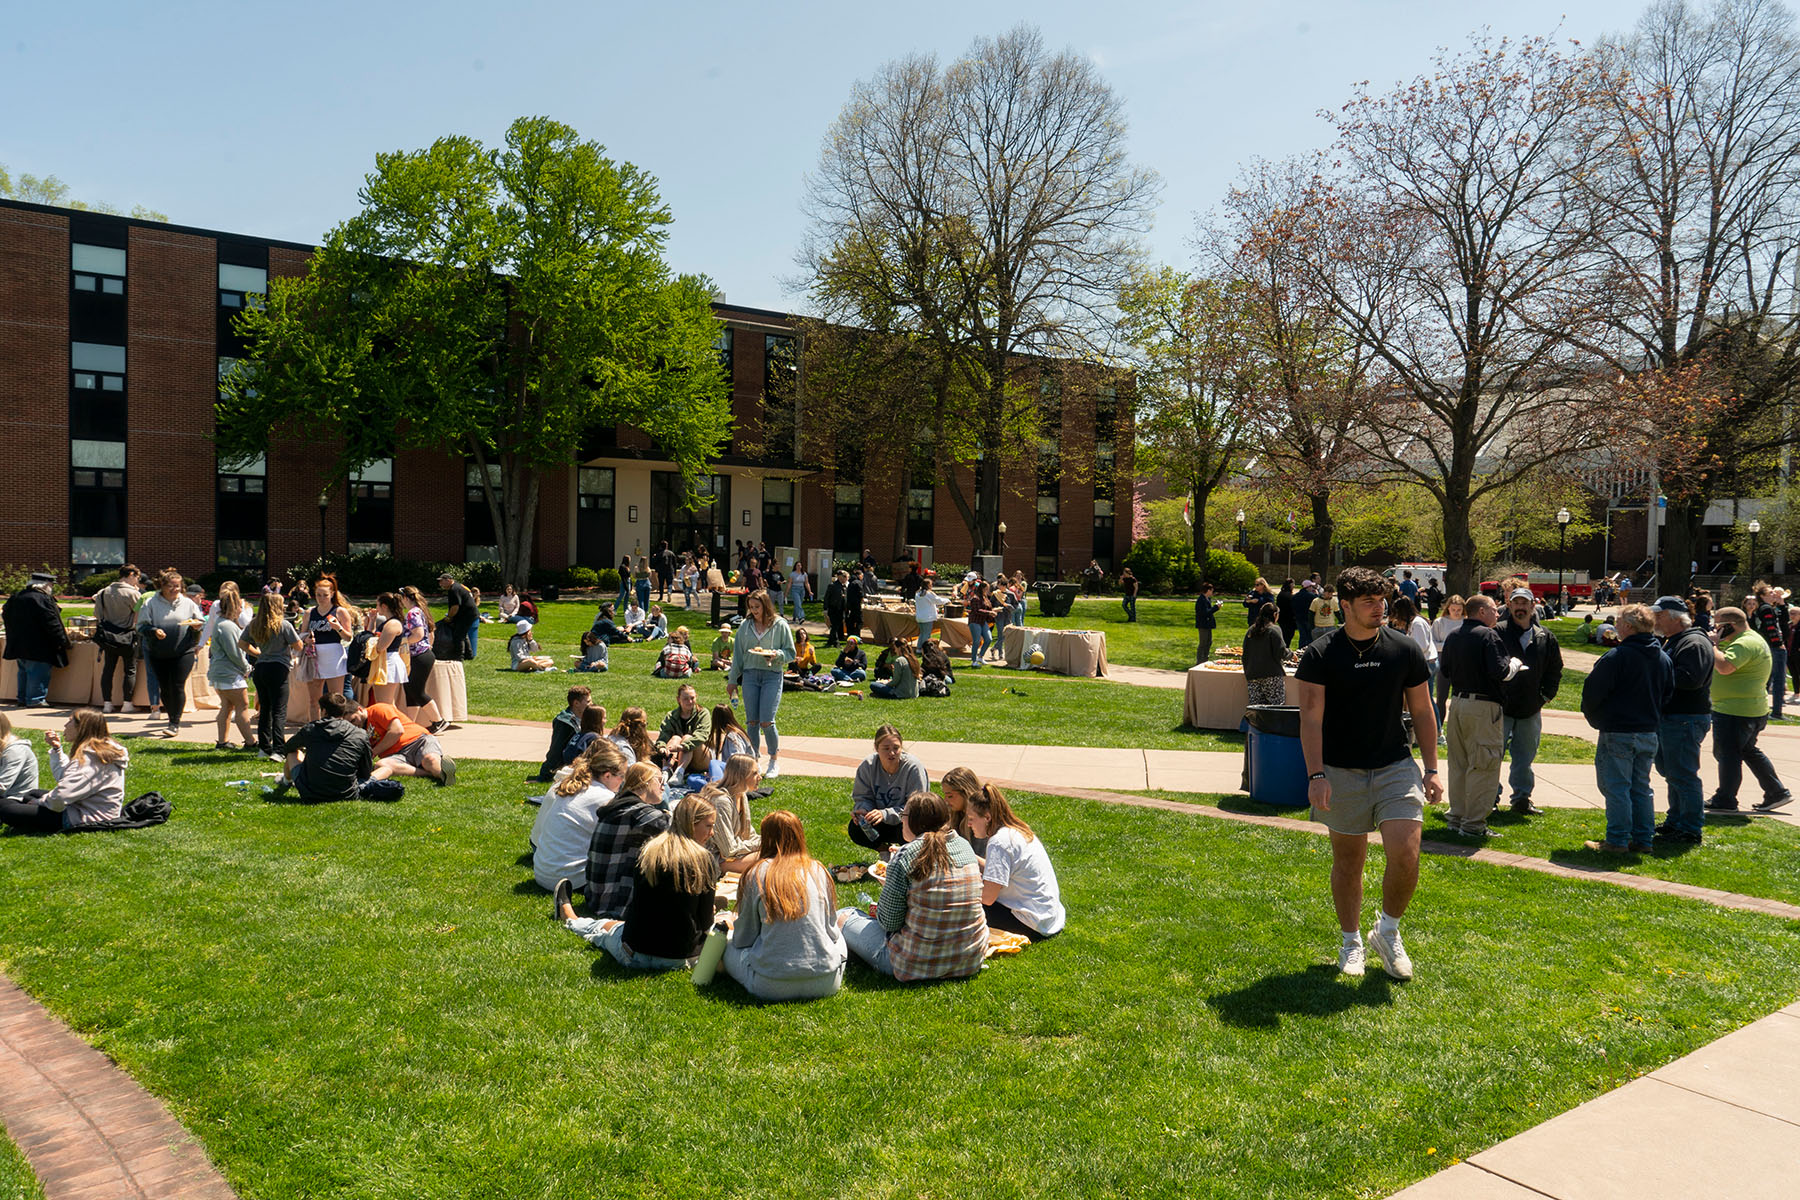 Groups of students sitting on campus lawn.